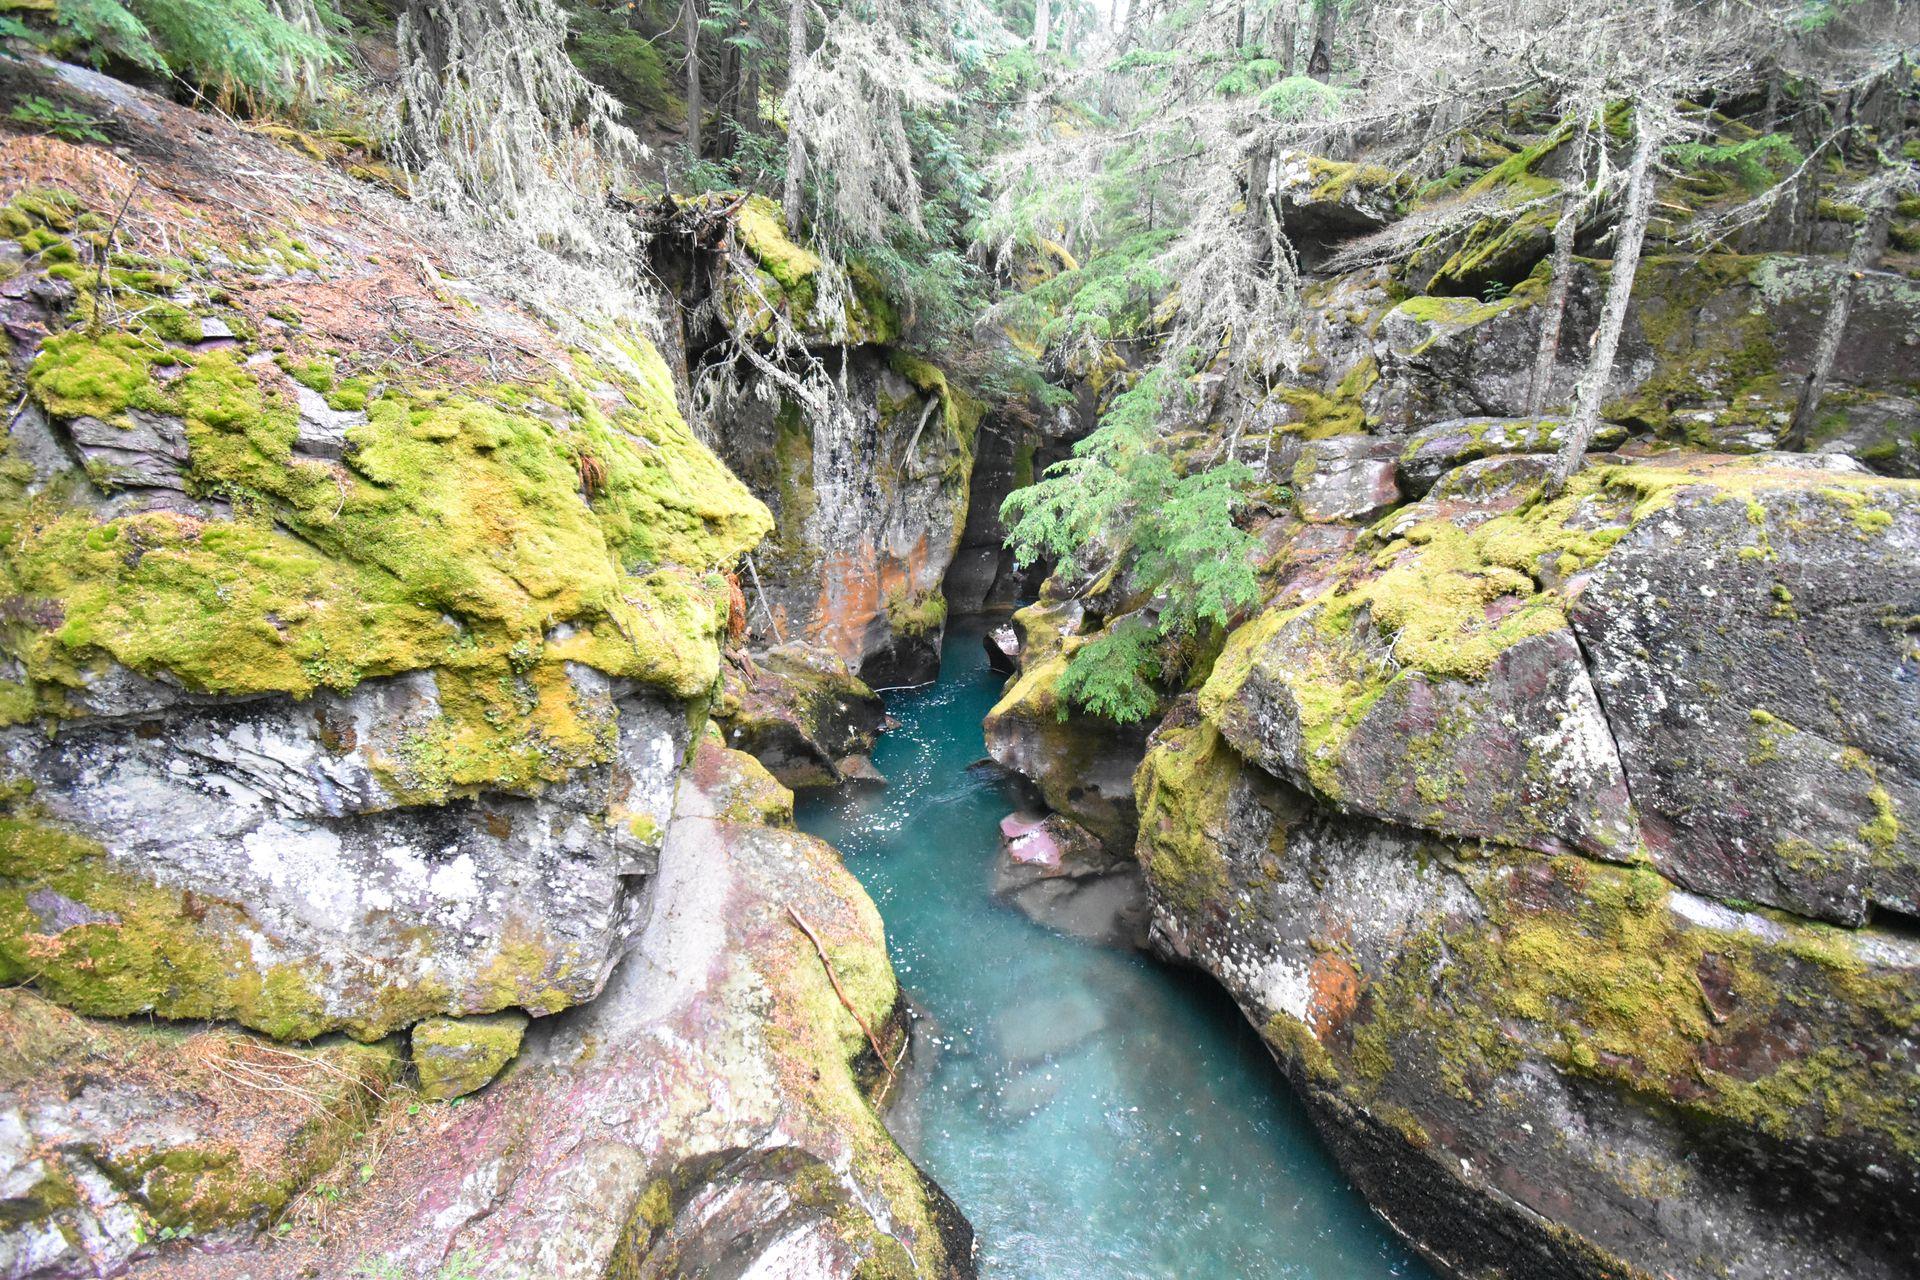 A small stream of bright blue water surrounded by rocks that are covered in bright green moss.